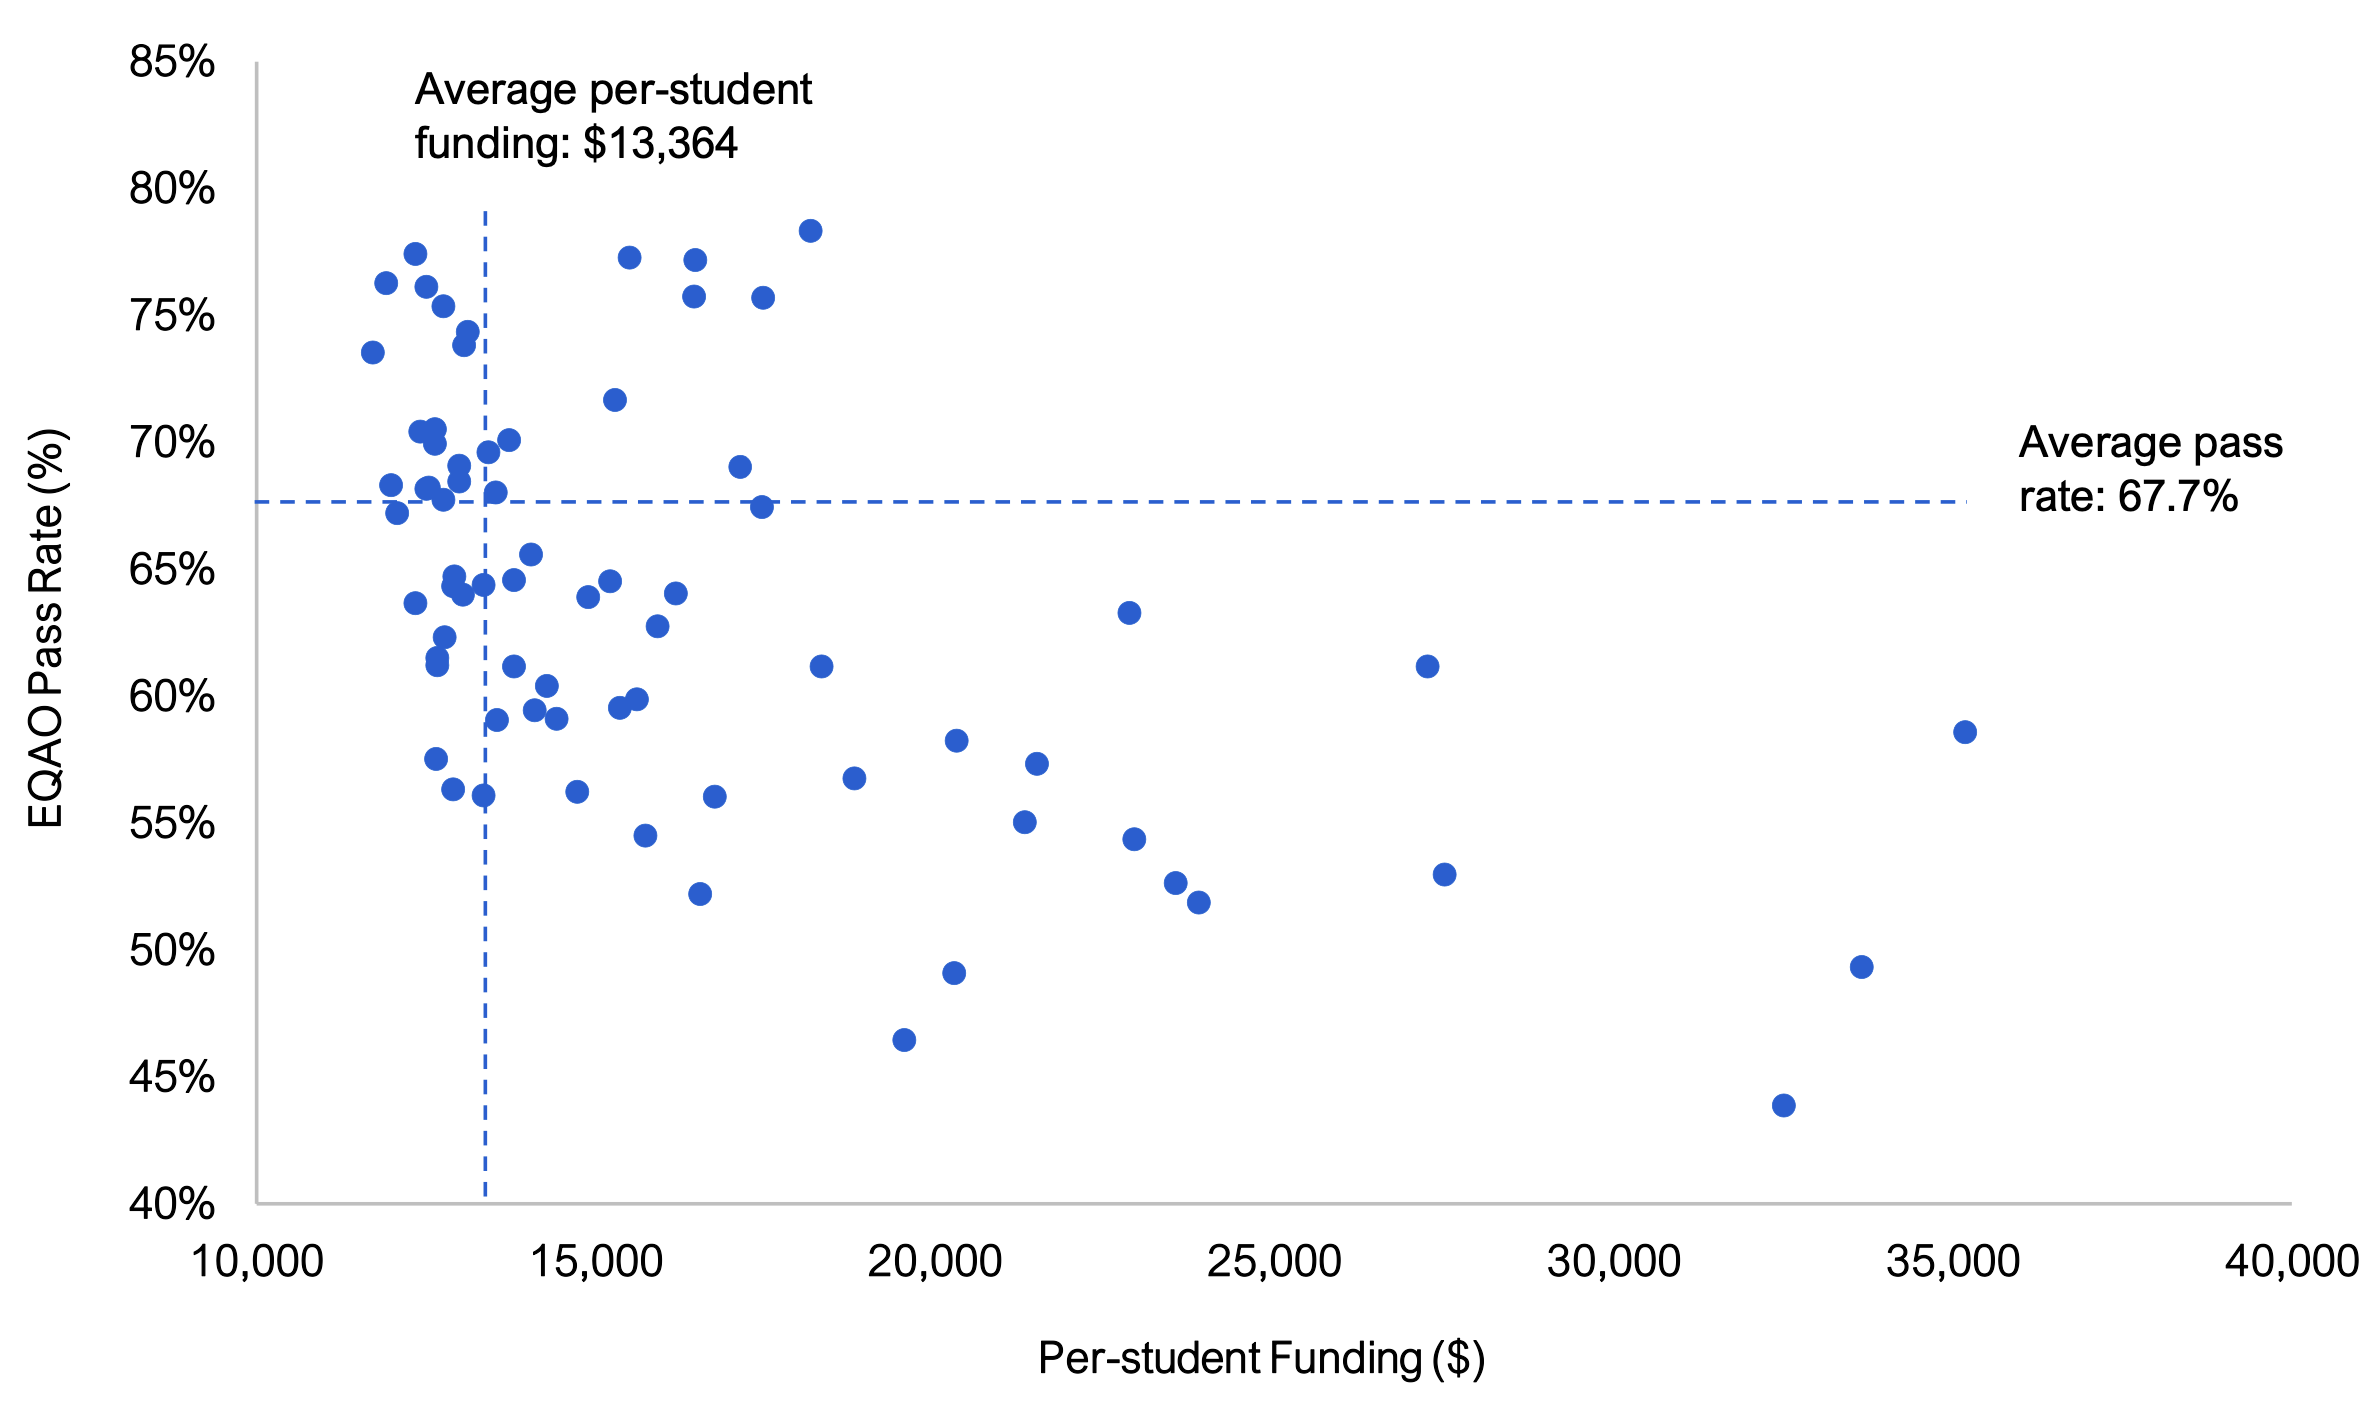 Figure 8.5 shows average EQAO pass rates by school board, against per-student funding. The school boards with the highest per-student funding had lower-than-average EQAO pass rates.